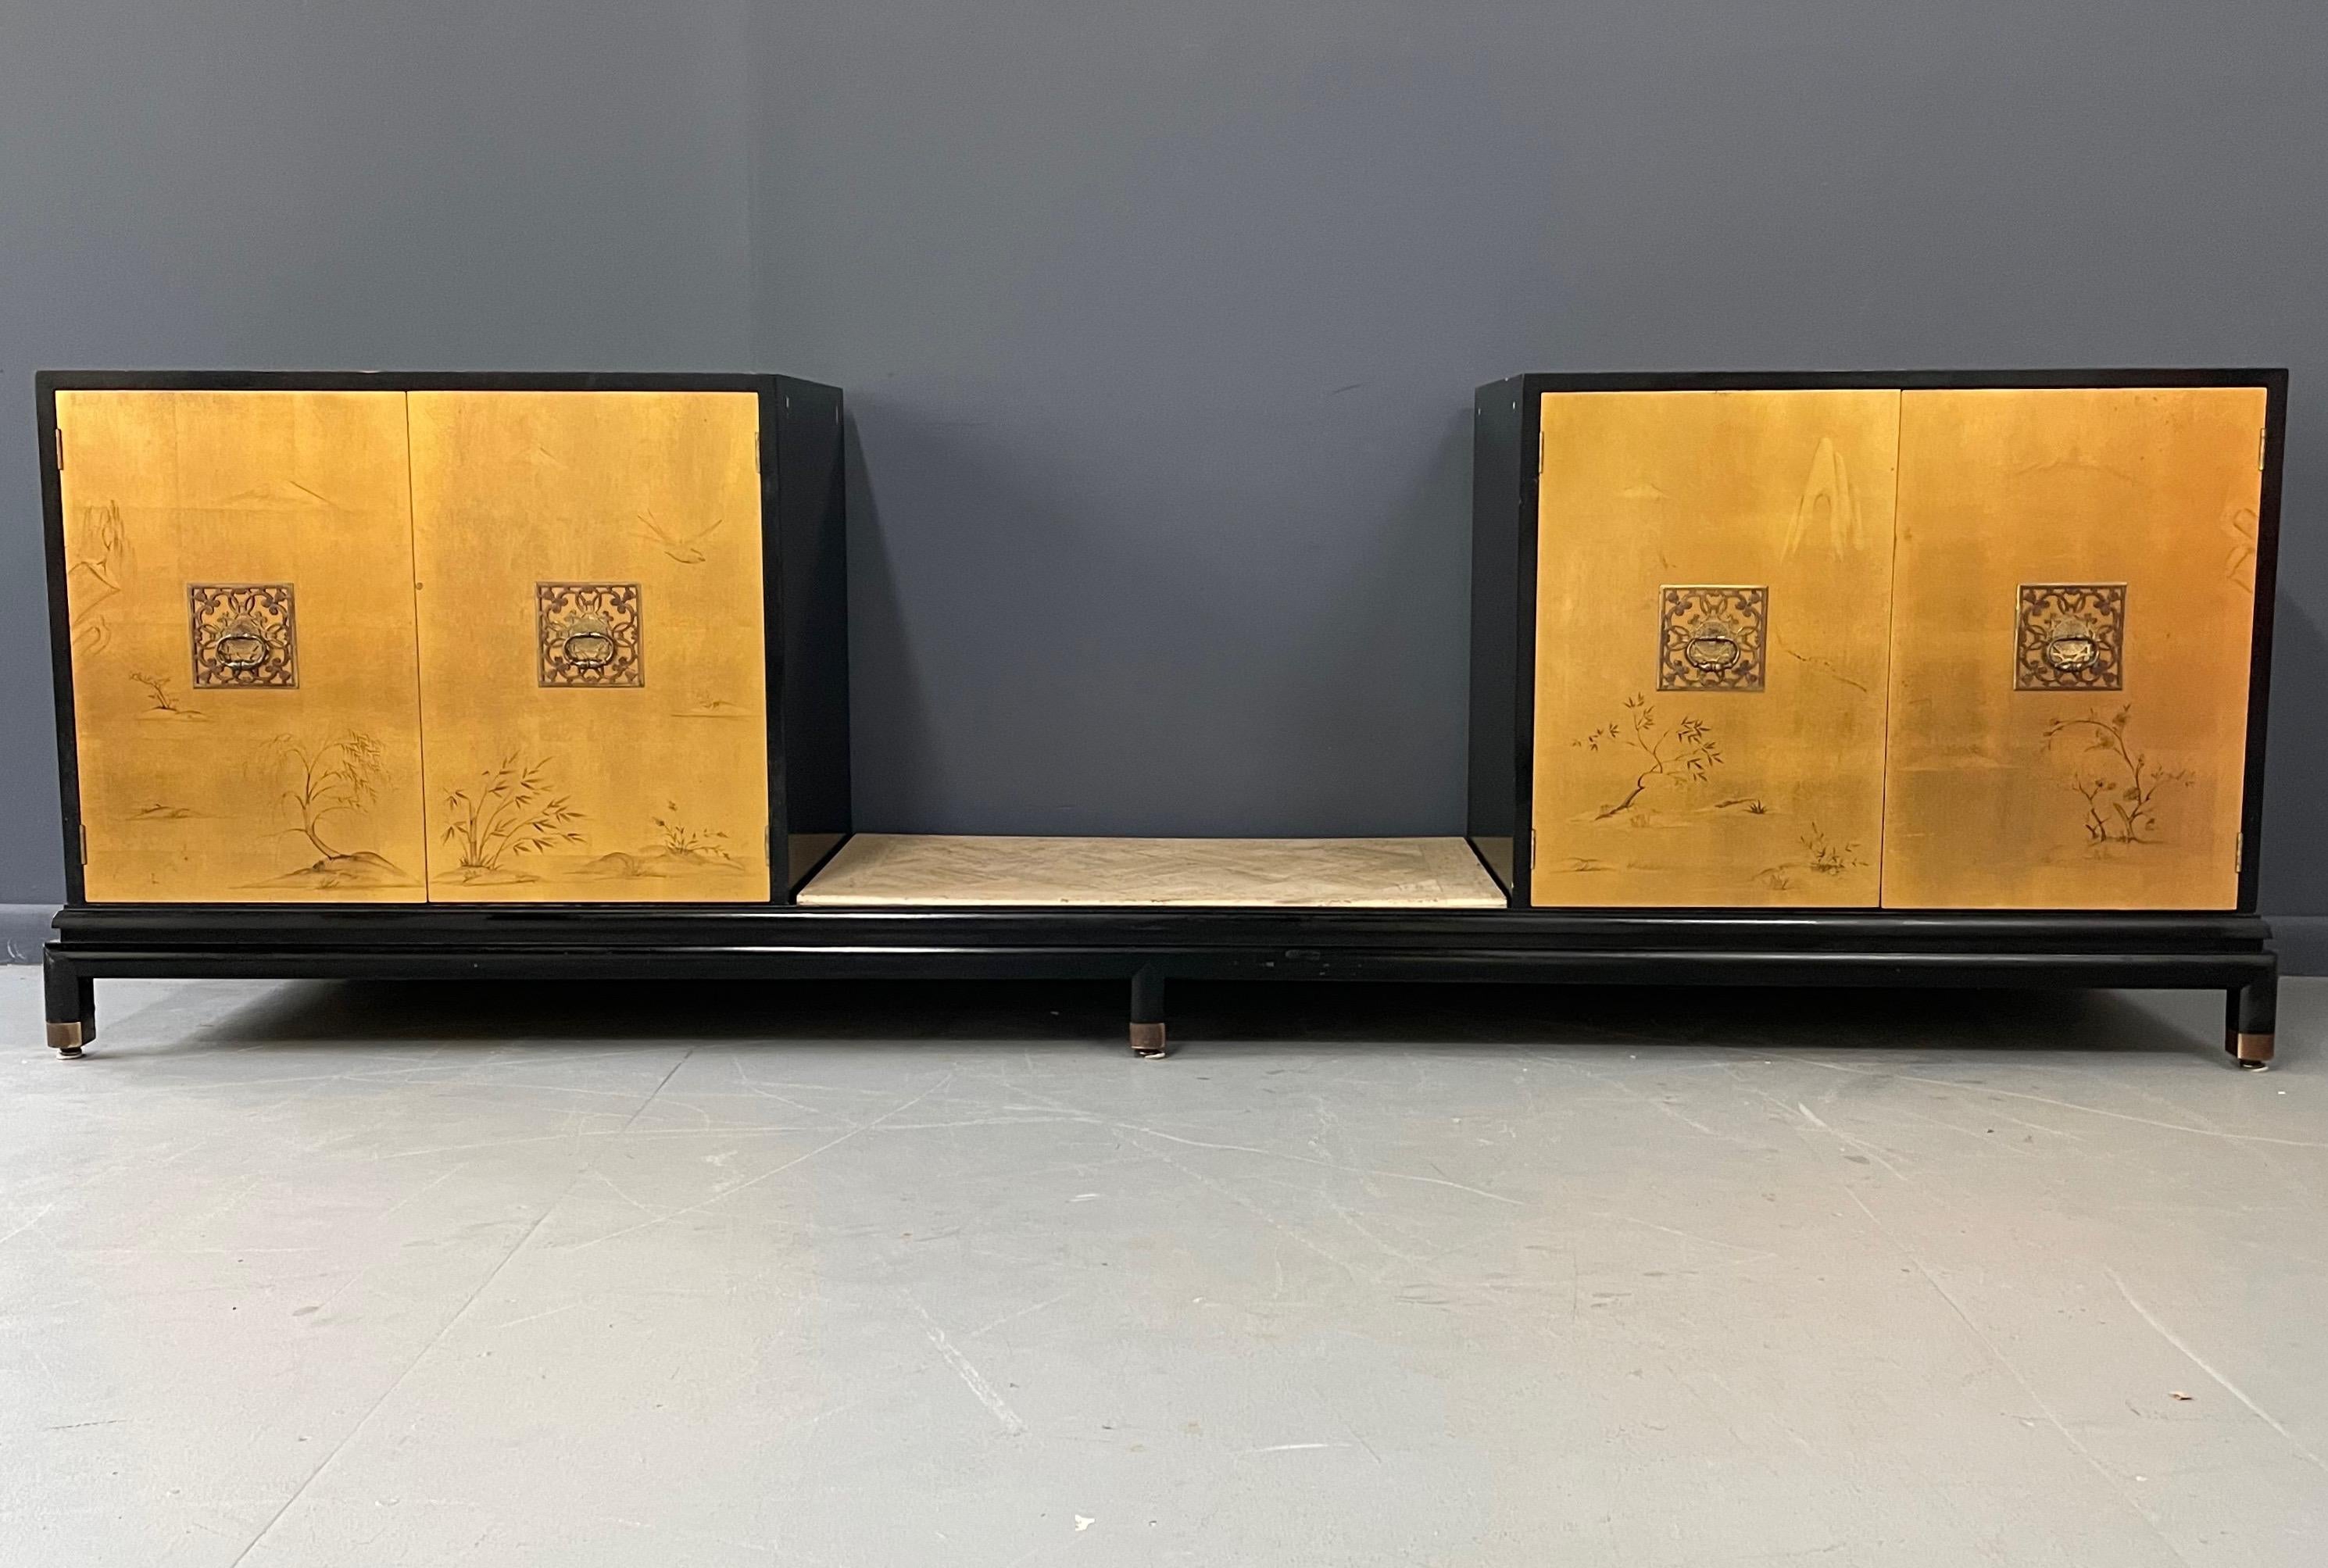 Lovely Renzo Rutili credenza with an Asian themed gold leaf cabinets with two shelves in each and a finished back with a pagoda design and a travertine shelf.